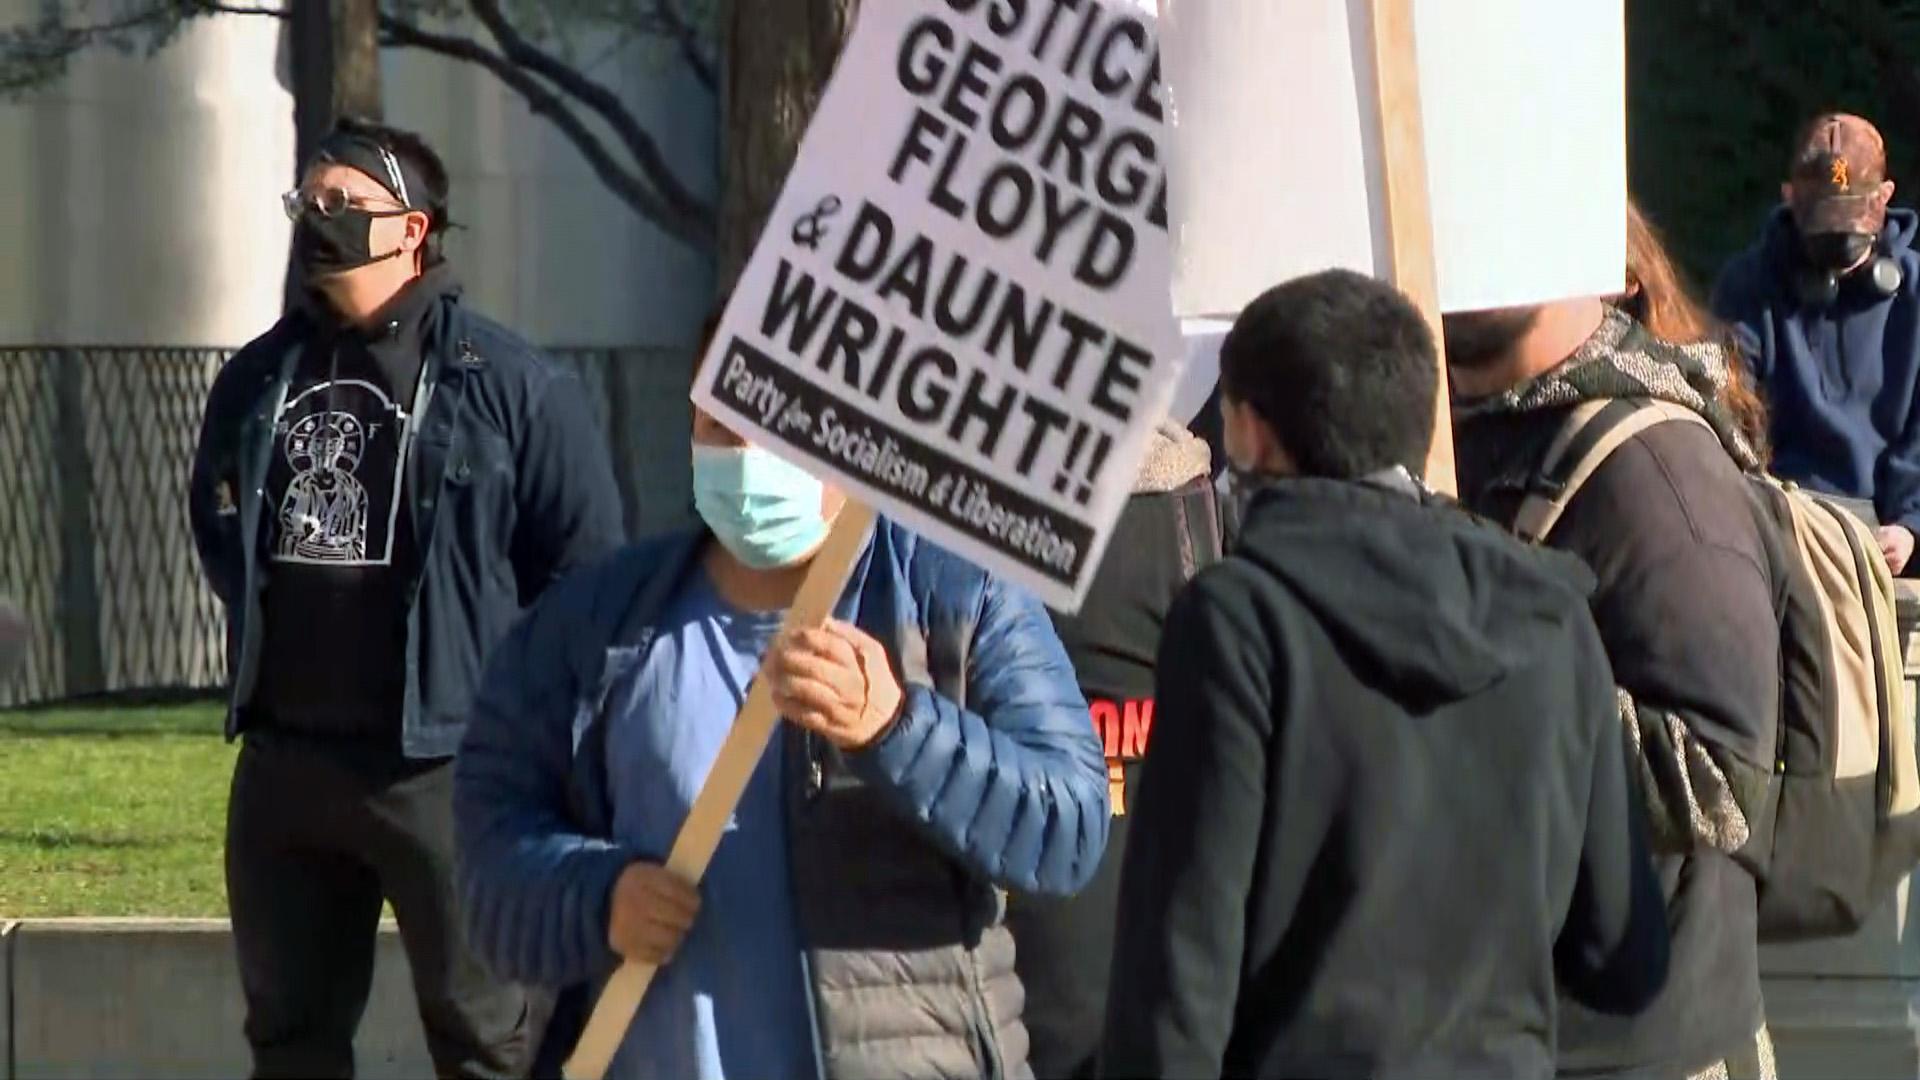 A group of approximately 100 protesters gathered near the Cloud Gate sculpture in Millennium Park to protest police brutality on April 13, 2021. (WTTW News)